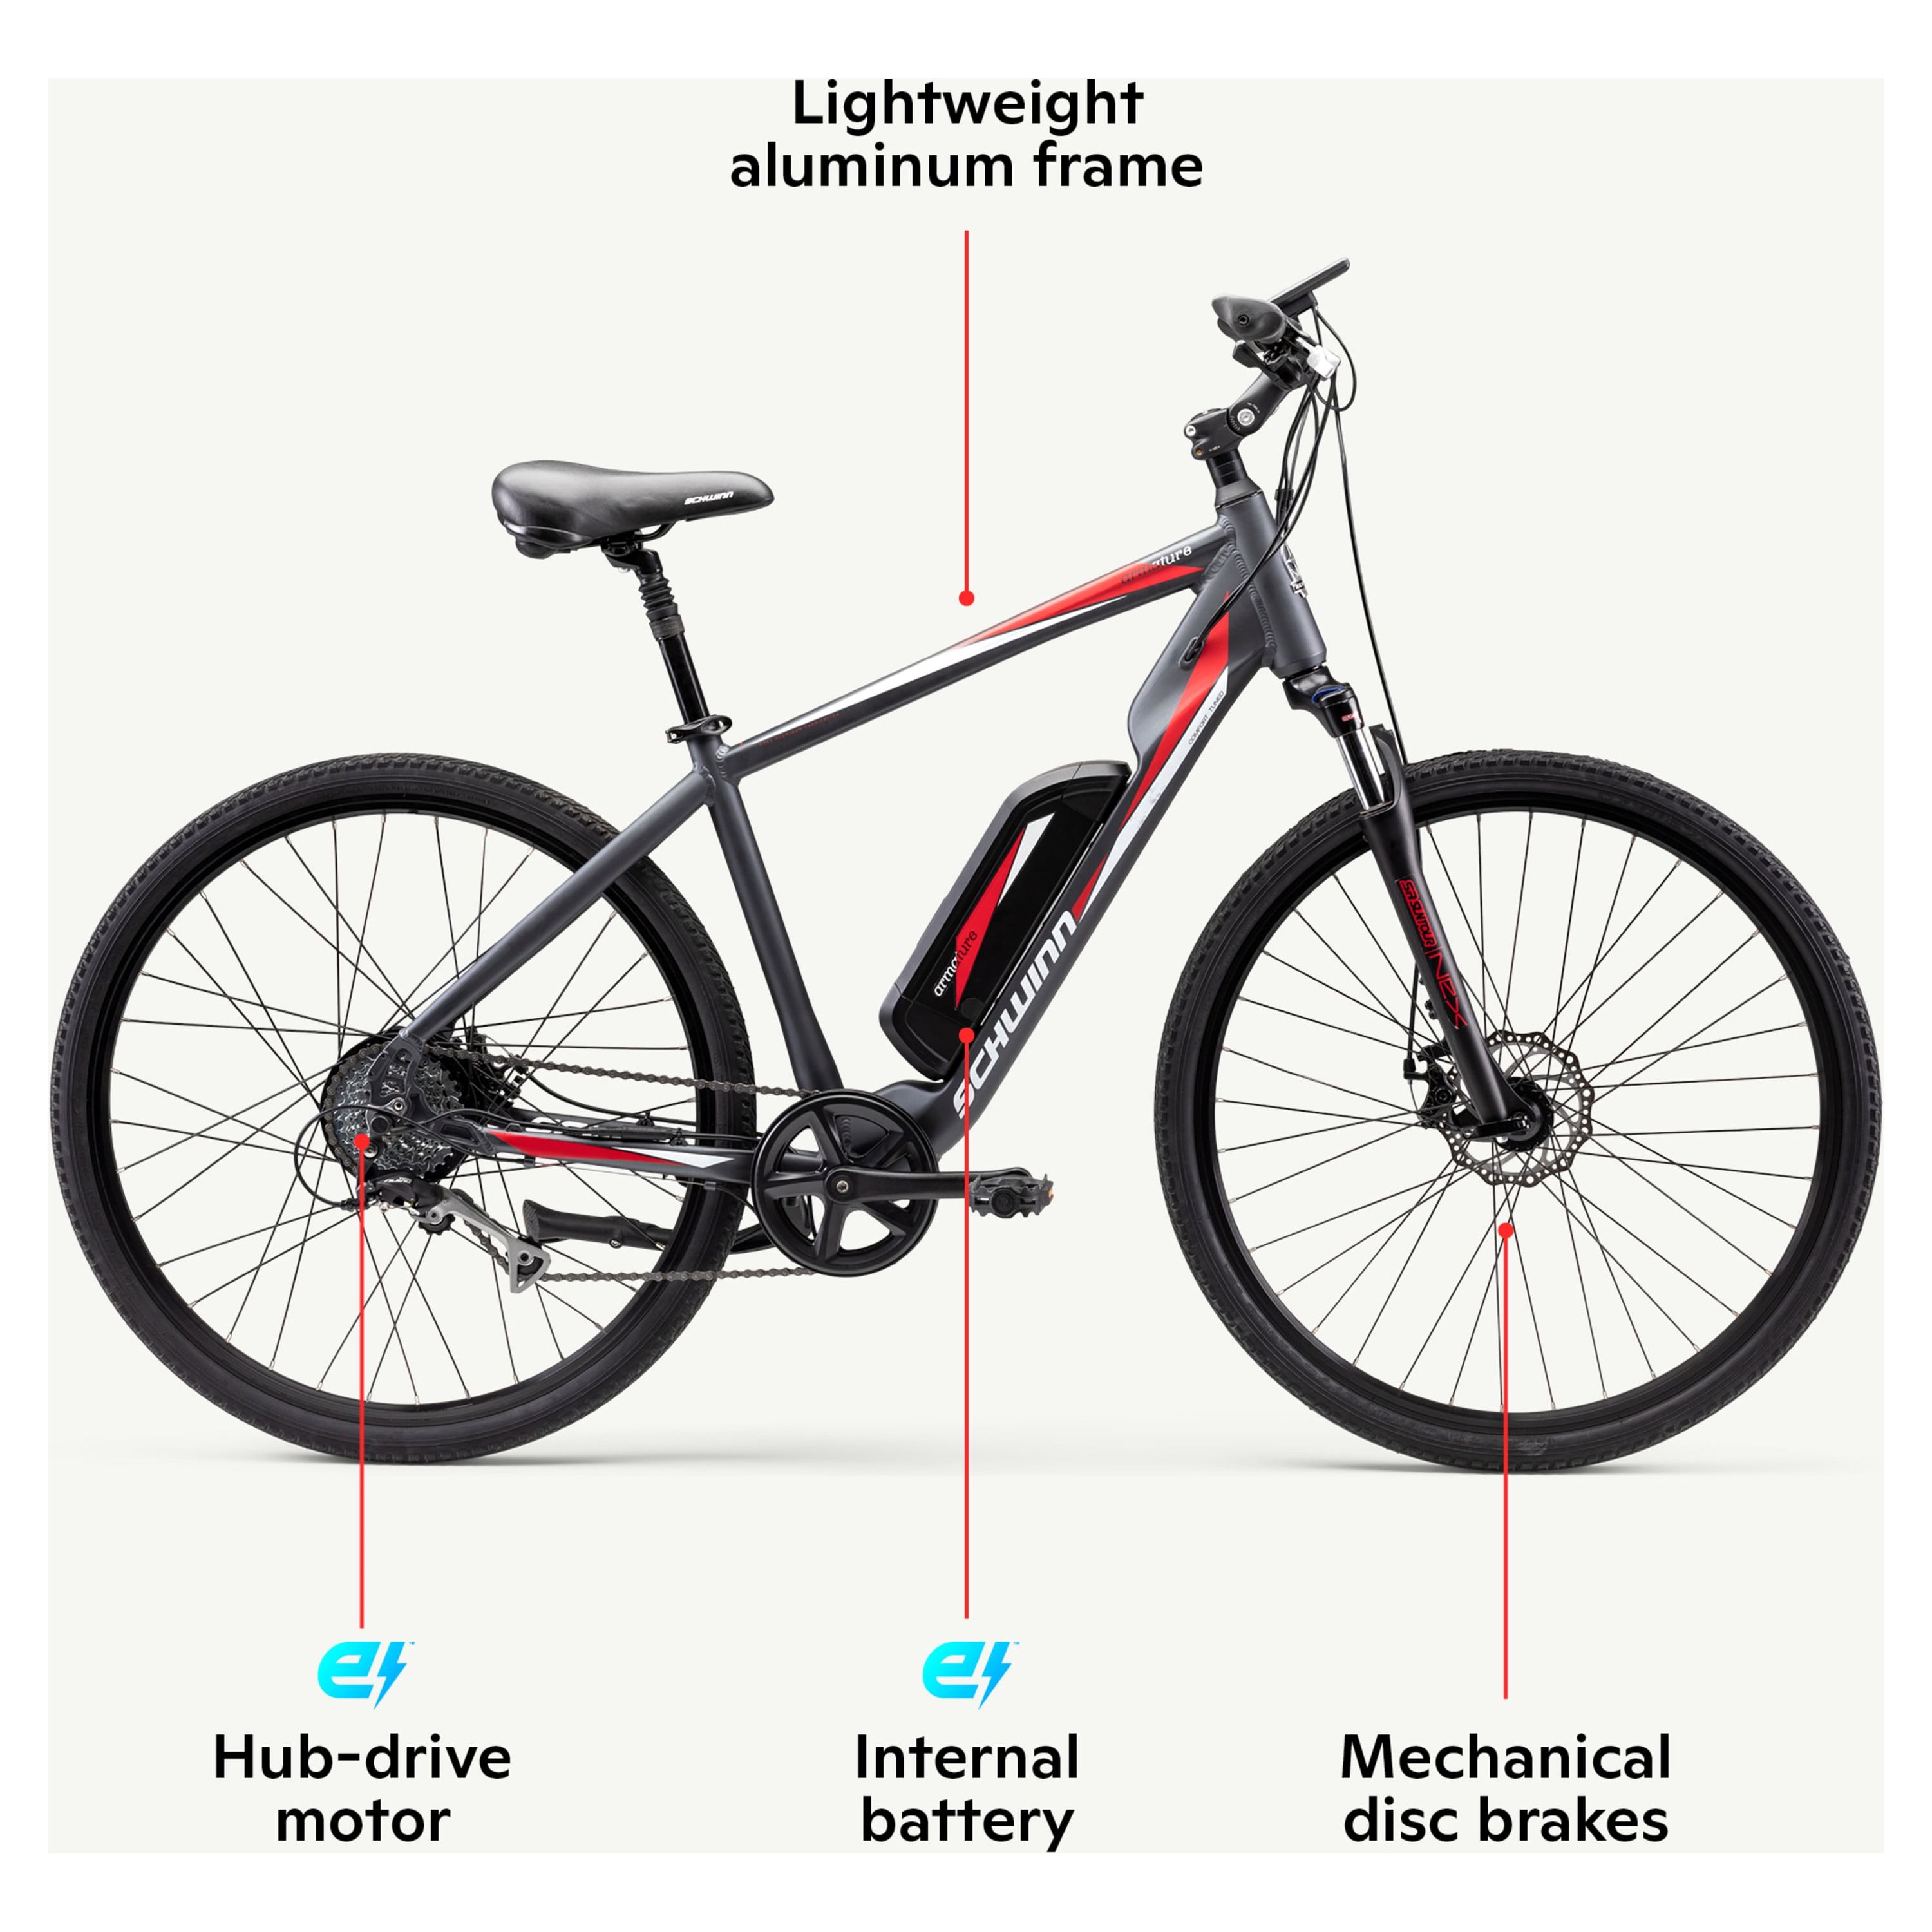 Schwinn 700c Armature Unisex Electric Bike, Black and Red Ebike for Adults, Large Frame - image 3 of 9